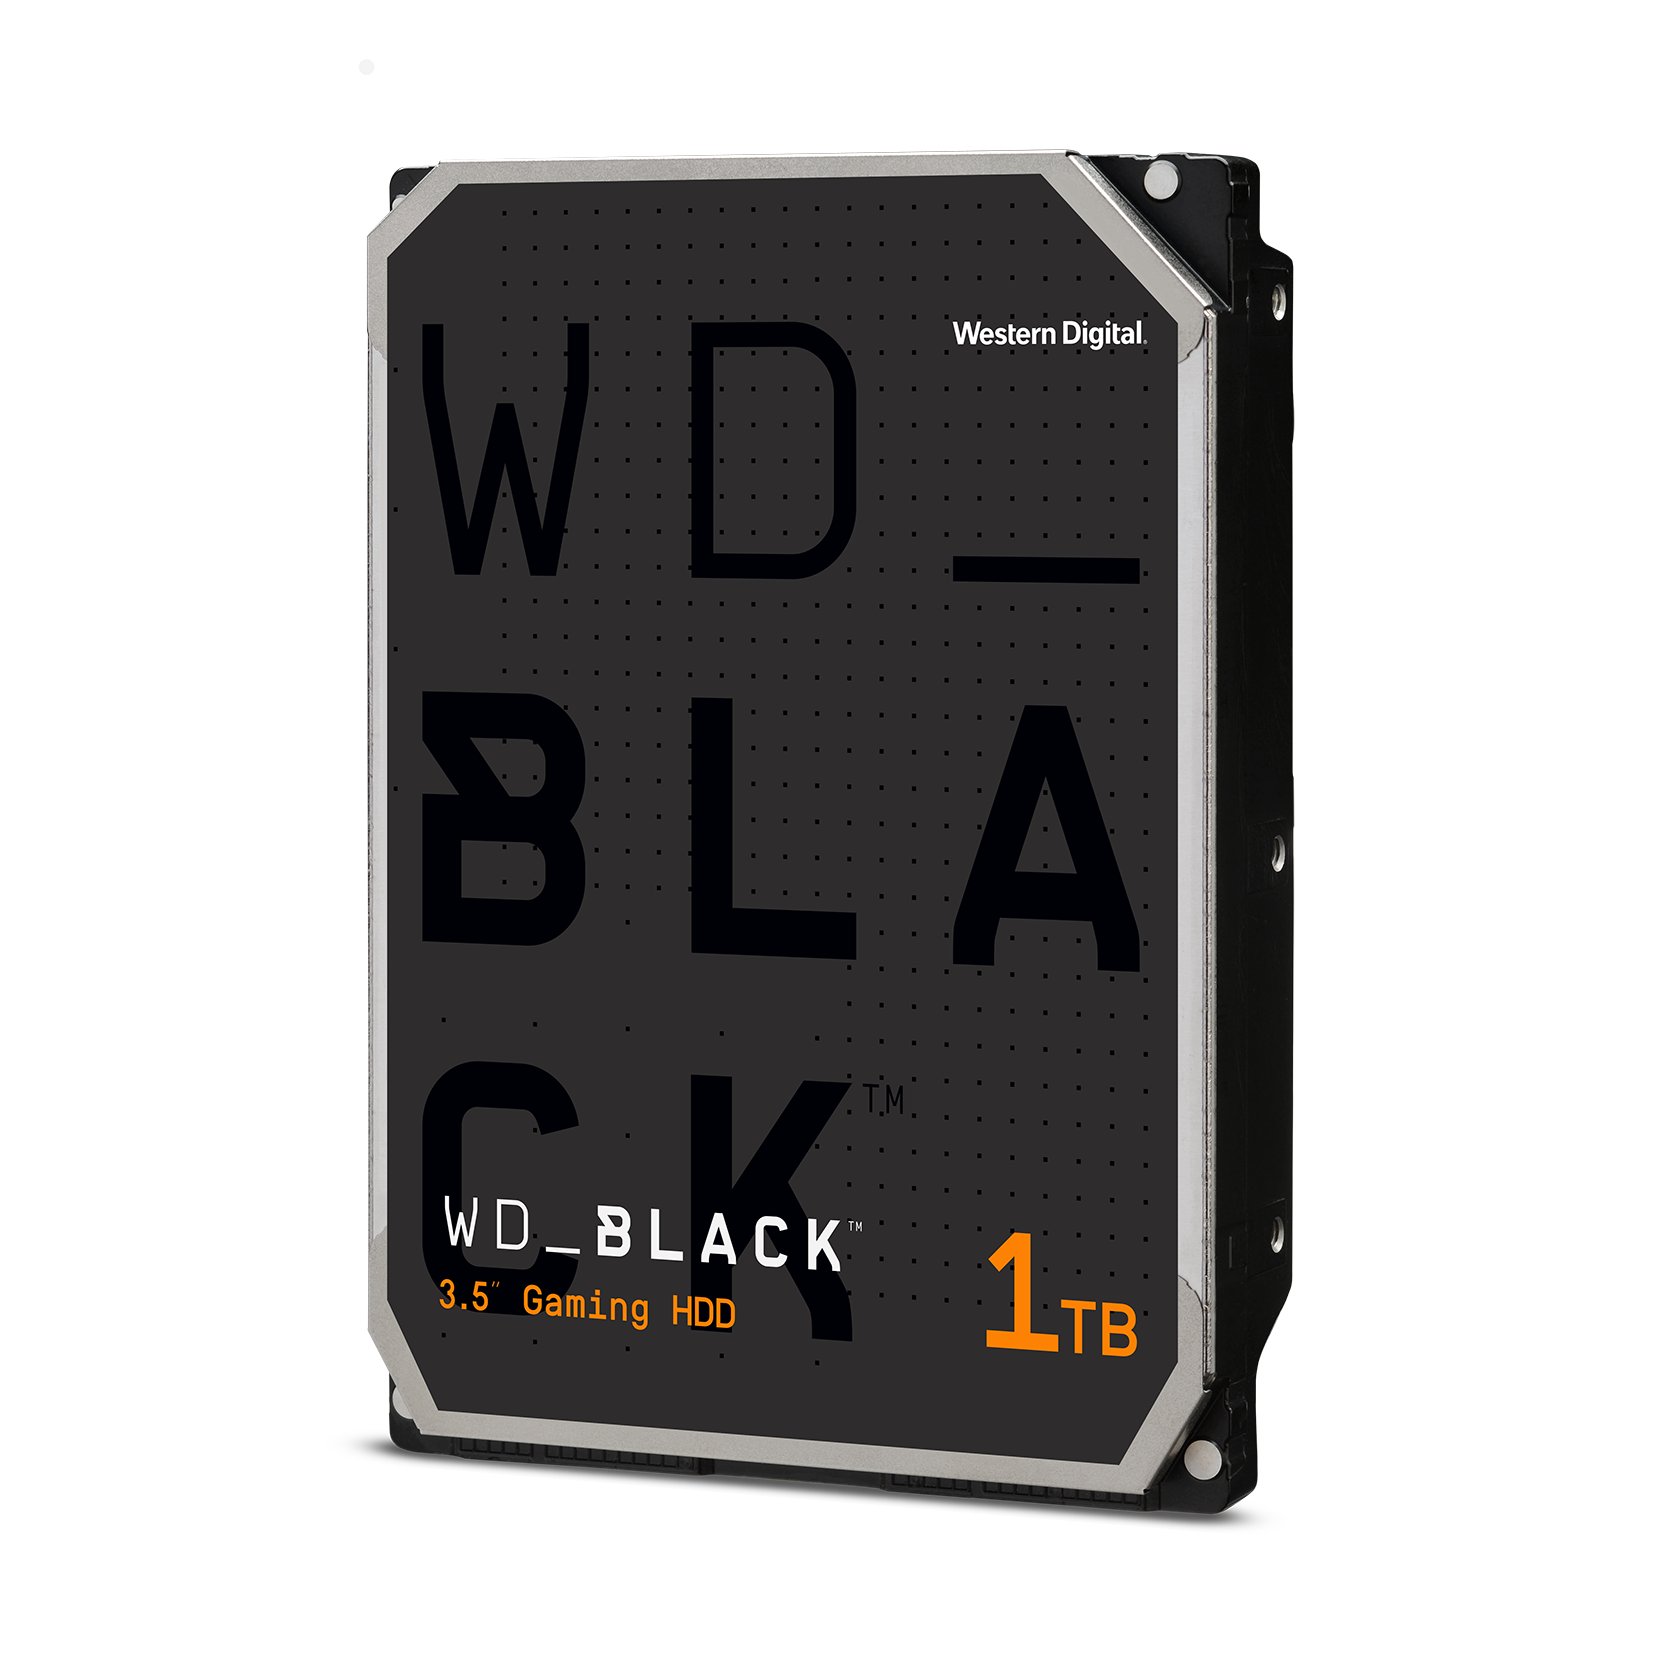 WD_BLACK 1TB 3.5'' Internal Gaming Hard Drive, 64MB Cache - WD1003FZEX - image 1 of 2